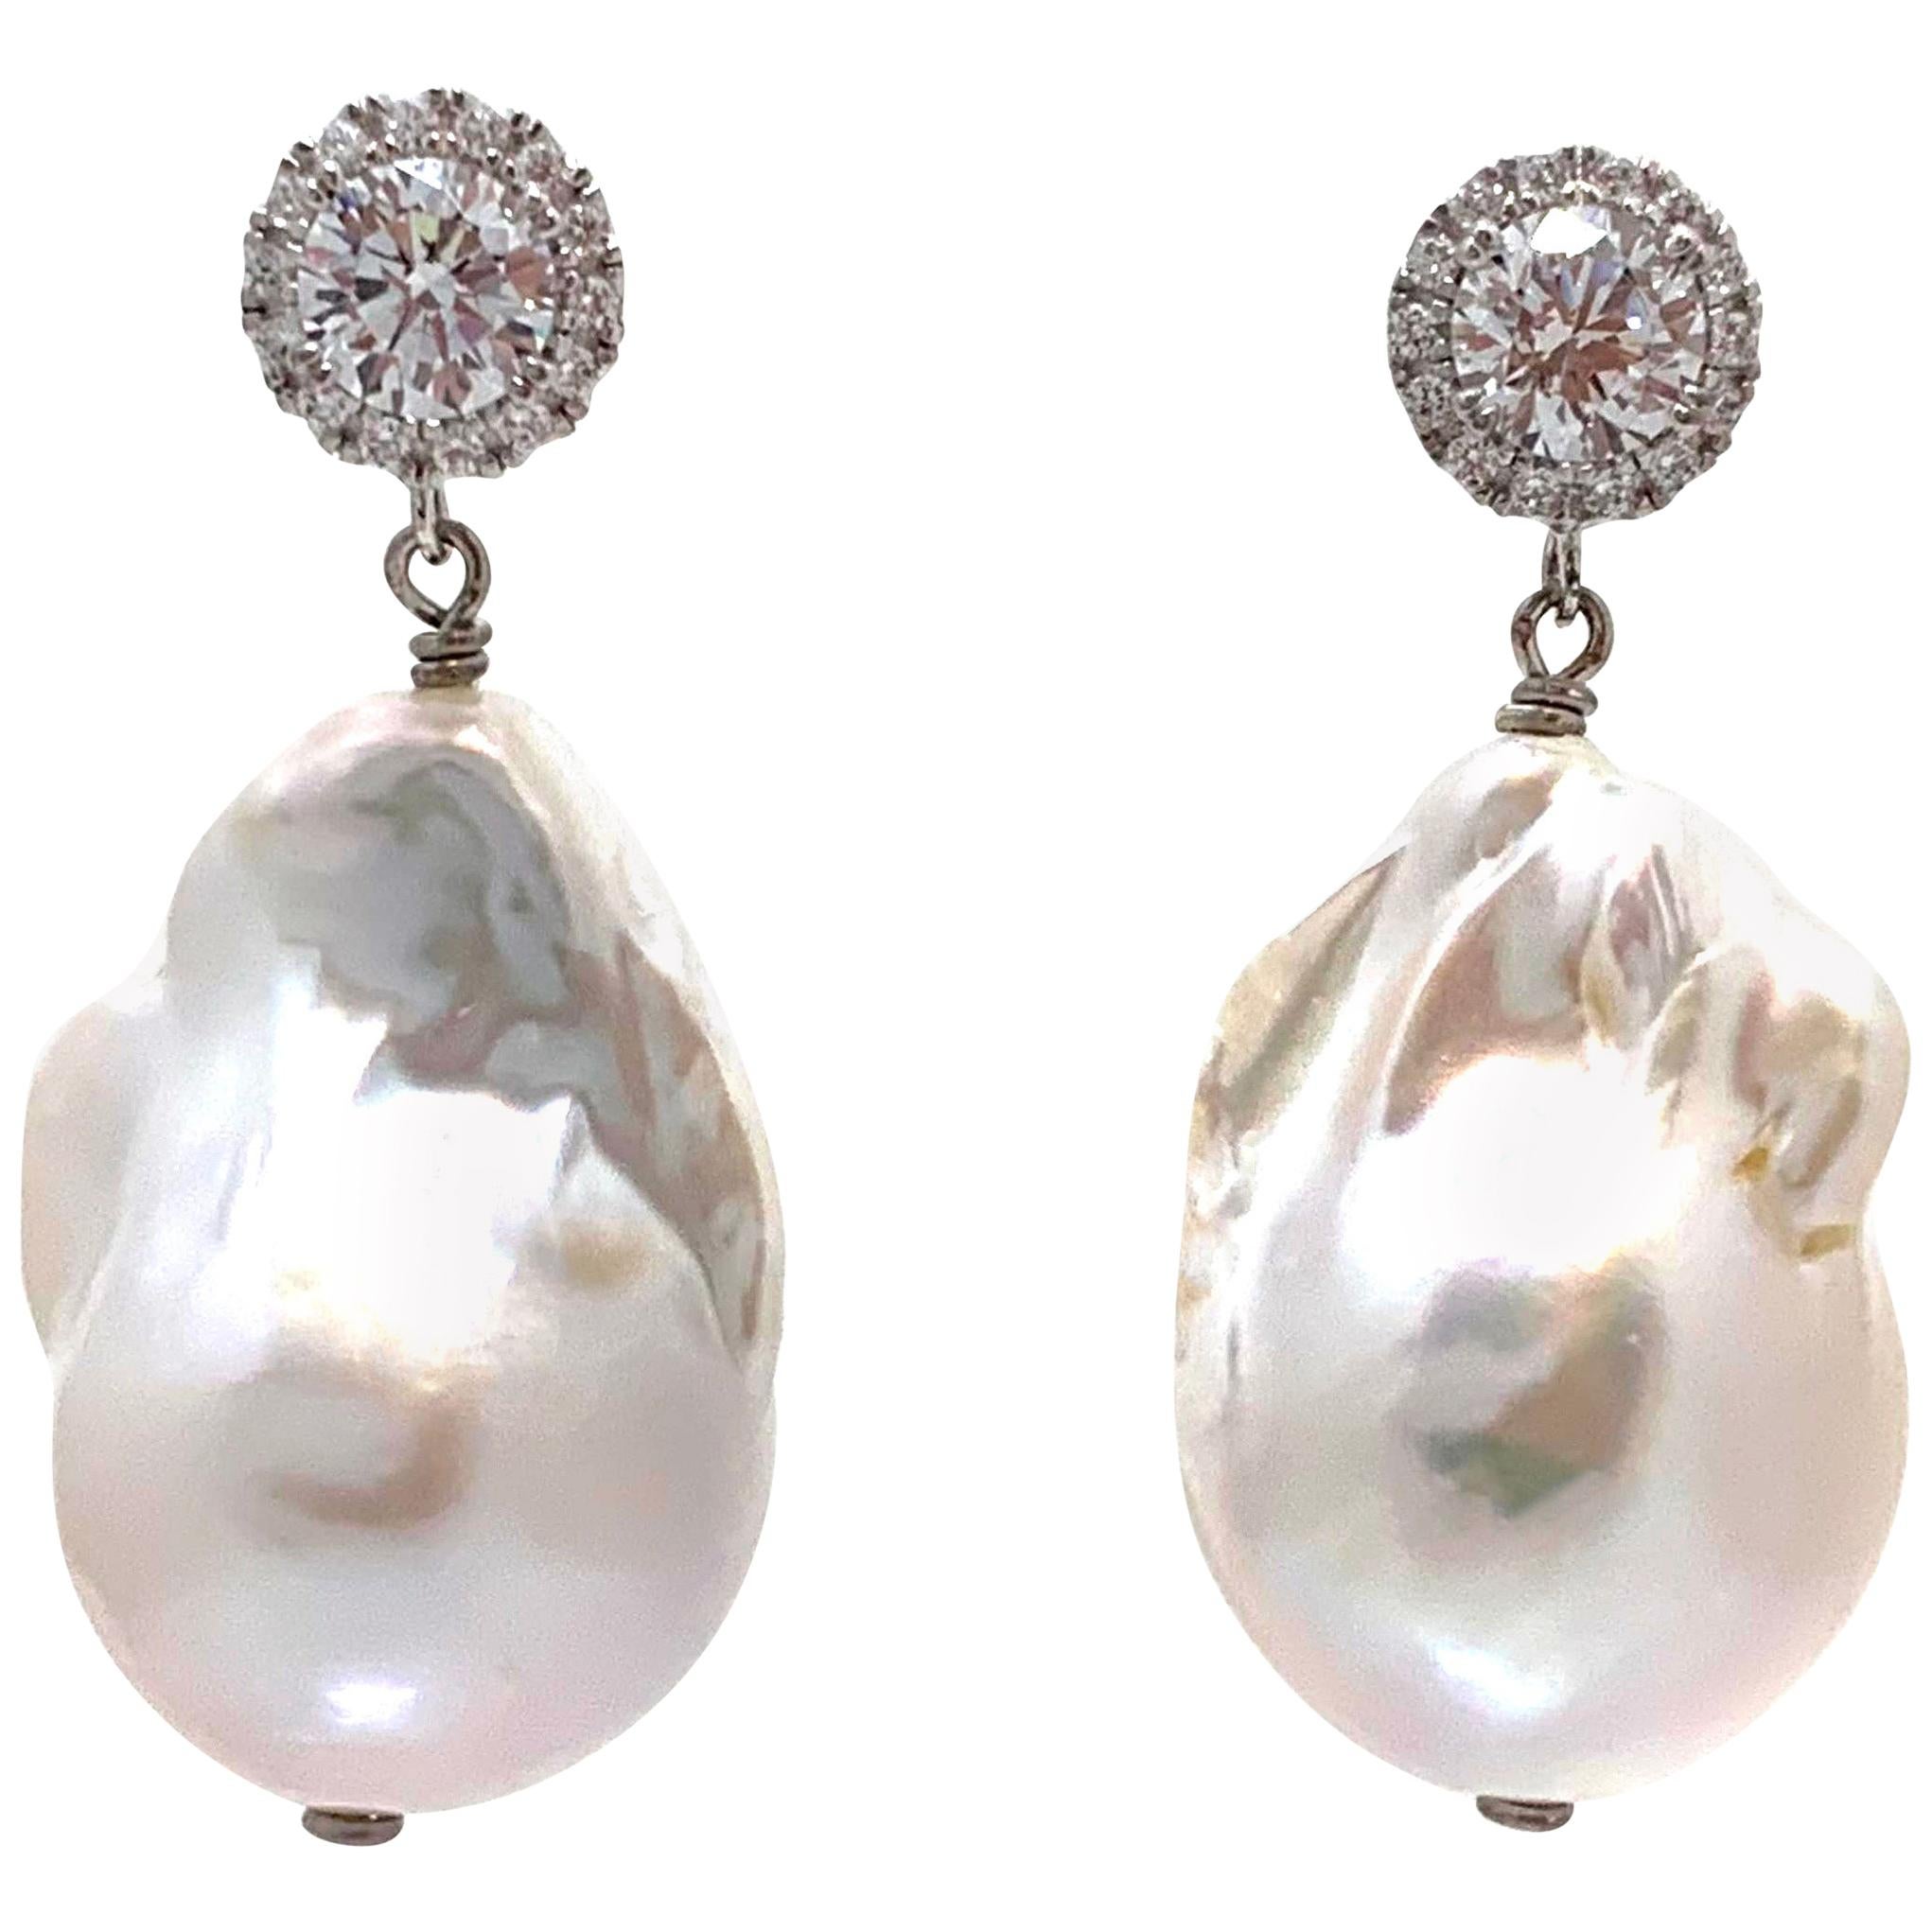 Halo stud and Large Lustrous 18mm Cultured Baroque Pearl Drop Earrings